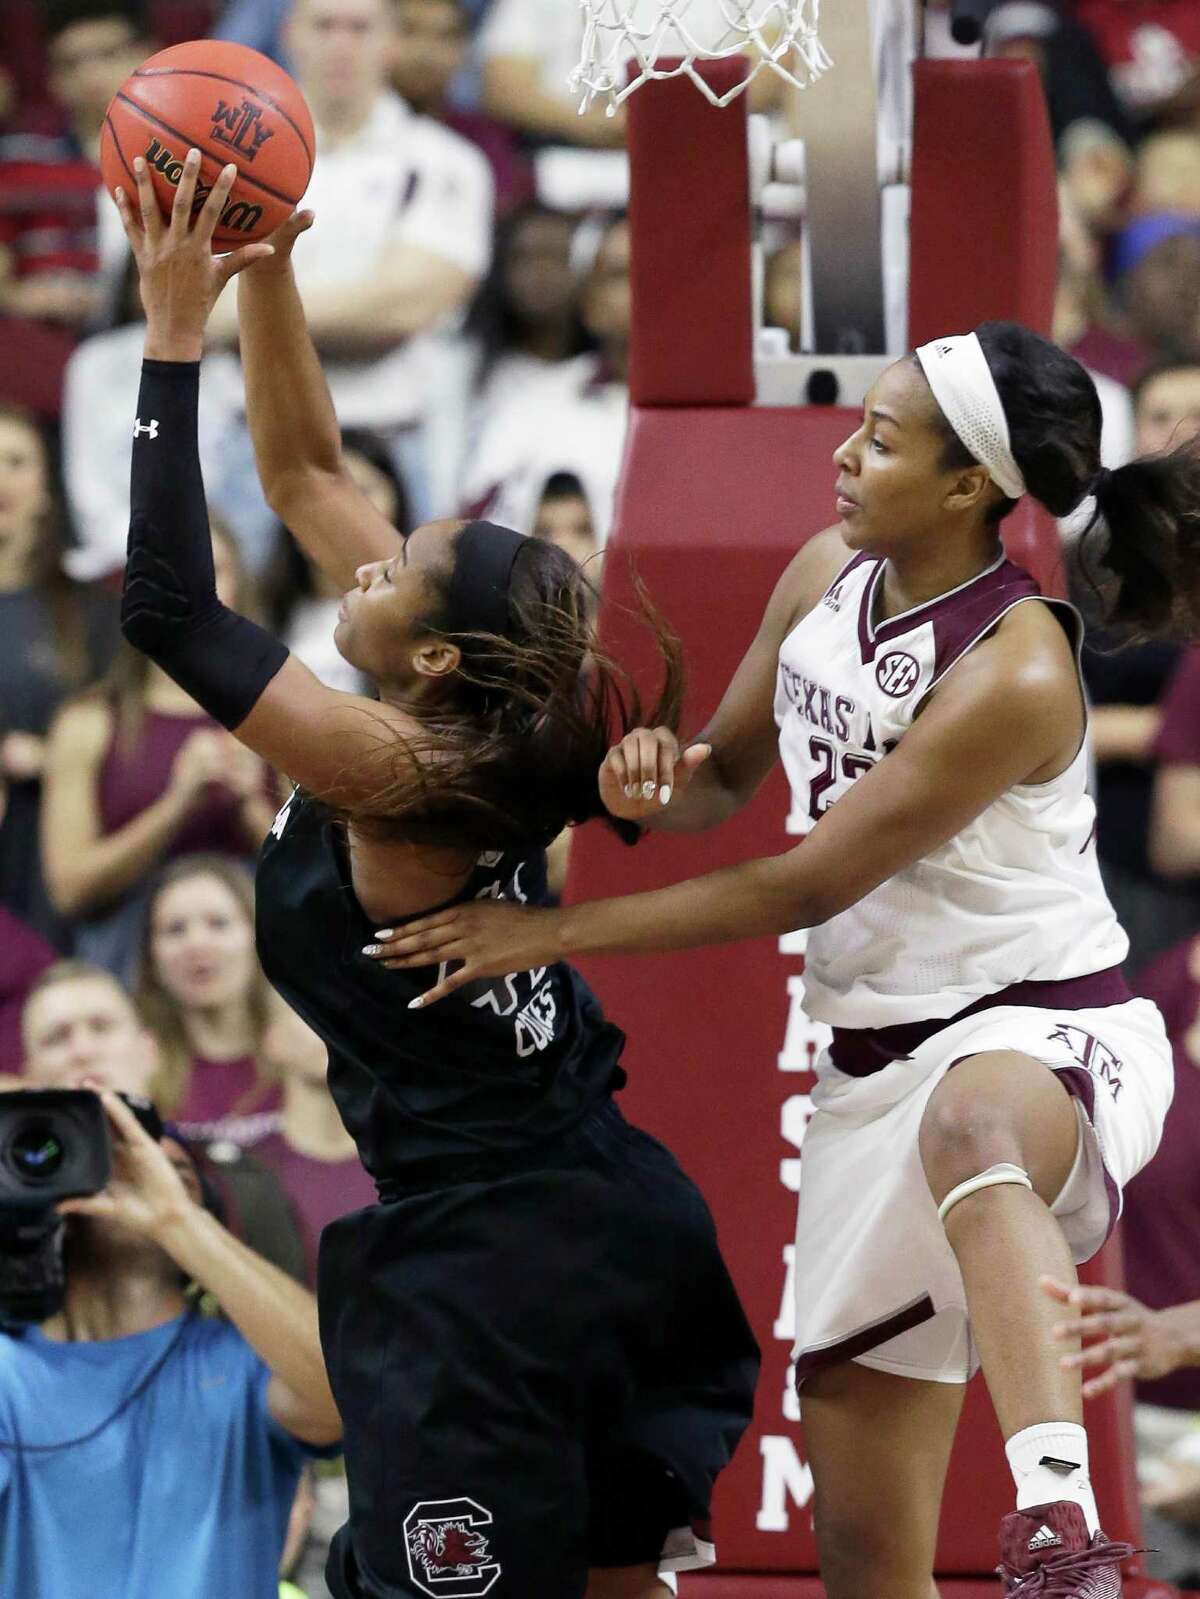 South Carolina's Alaina Coates, left, grabs a rebound ahead of Texas A&M's Rachel Mitchell (23) during the second half of an NCAA college basketball game, Sunday, Jan. 31, 2016, in College Station, Texas. South Carolina won 70-63. (AP Photo/Pat Sullivan)